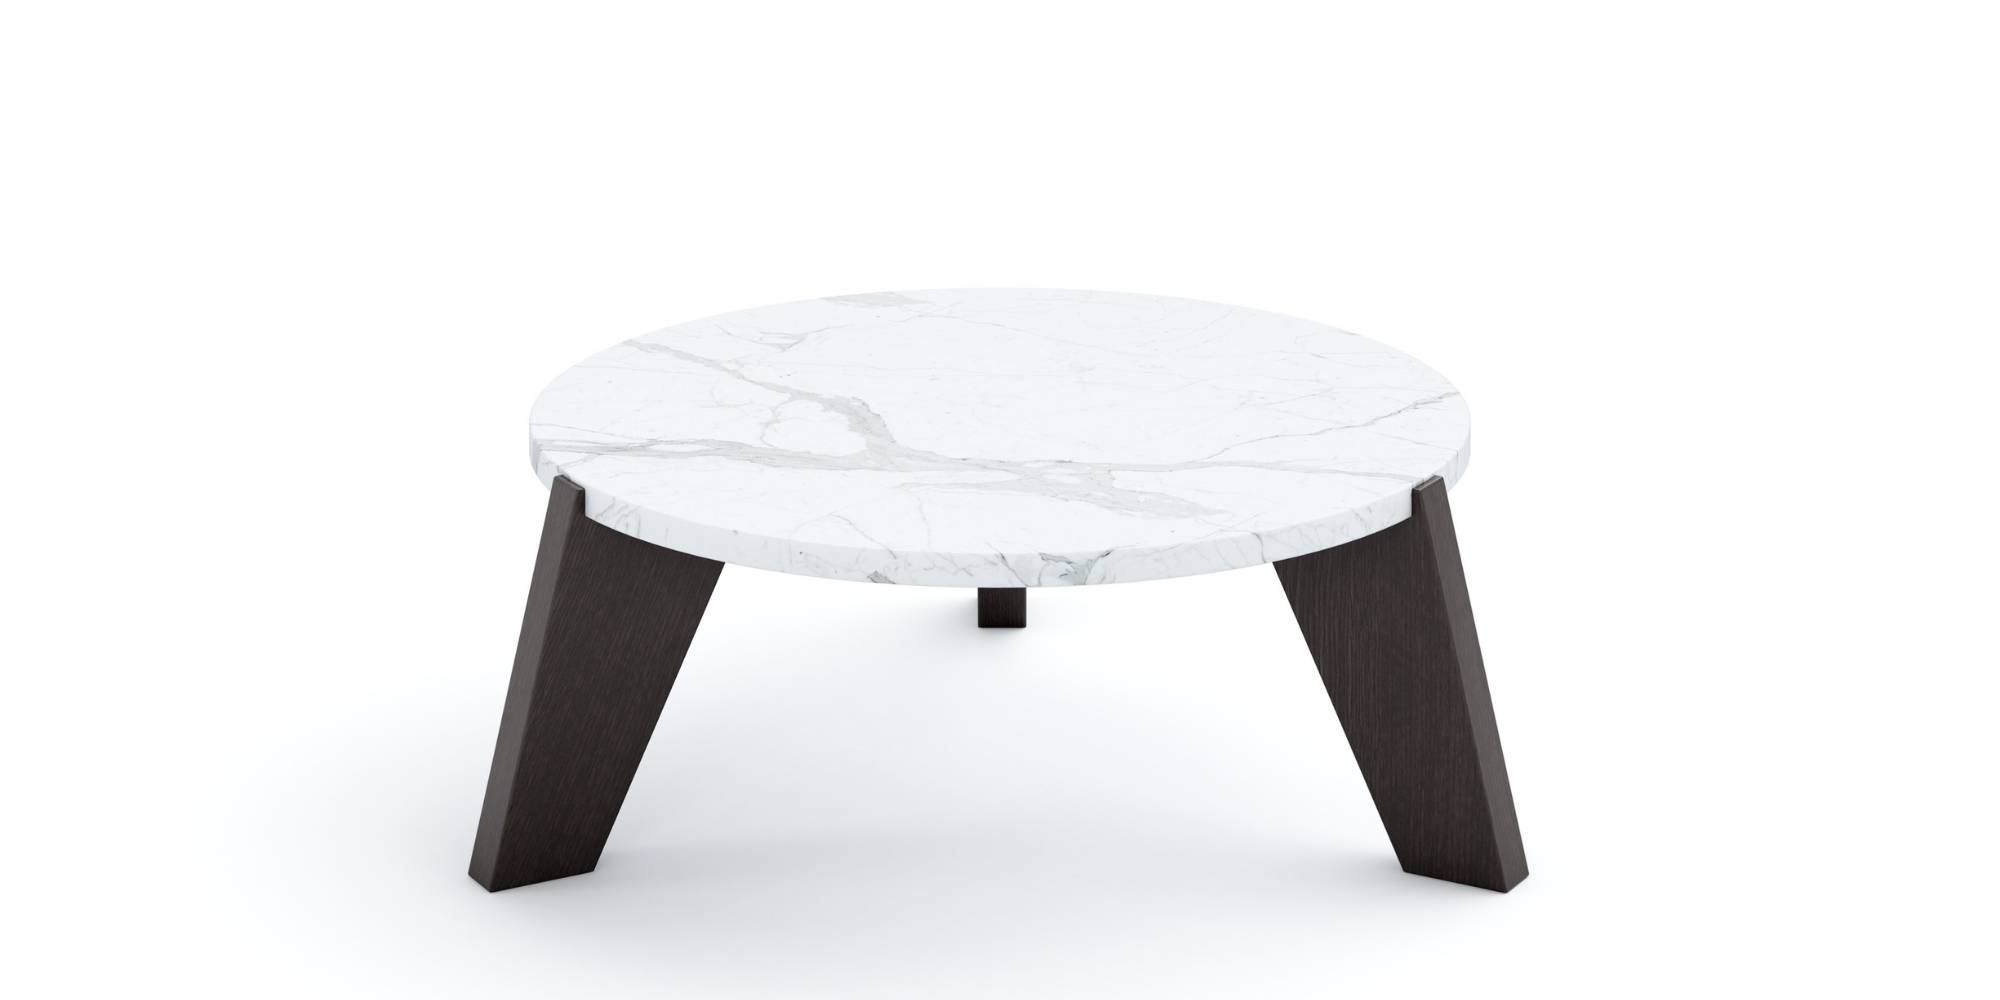 Tamarindo Round Dining Table in Outdoor Tables Dining Tables for Tamarindo collection